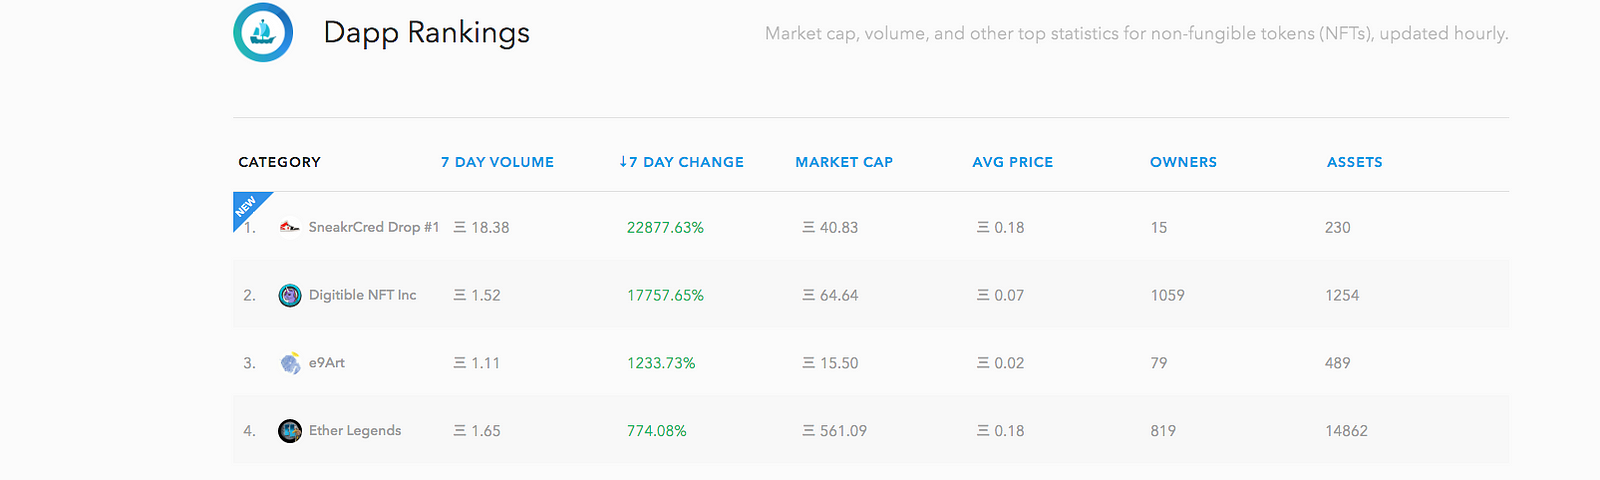 Open Sea, dAPP ranking, from Wednesday, February 20, 2020, puts SneakrCred at the Number 1 spot in the 7-Day Change ranking.